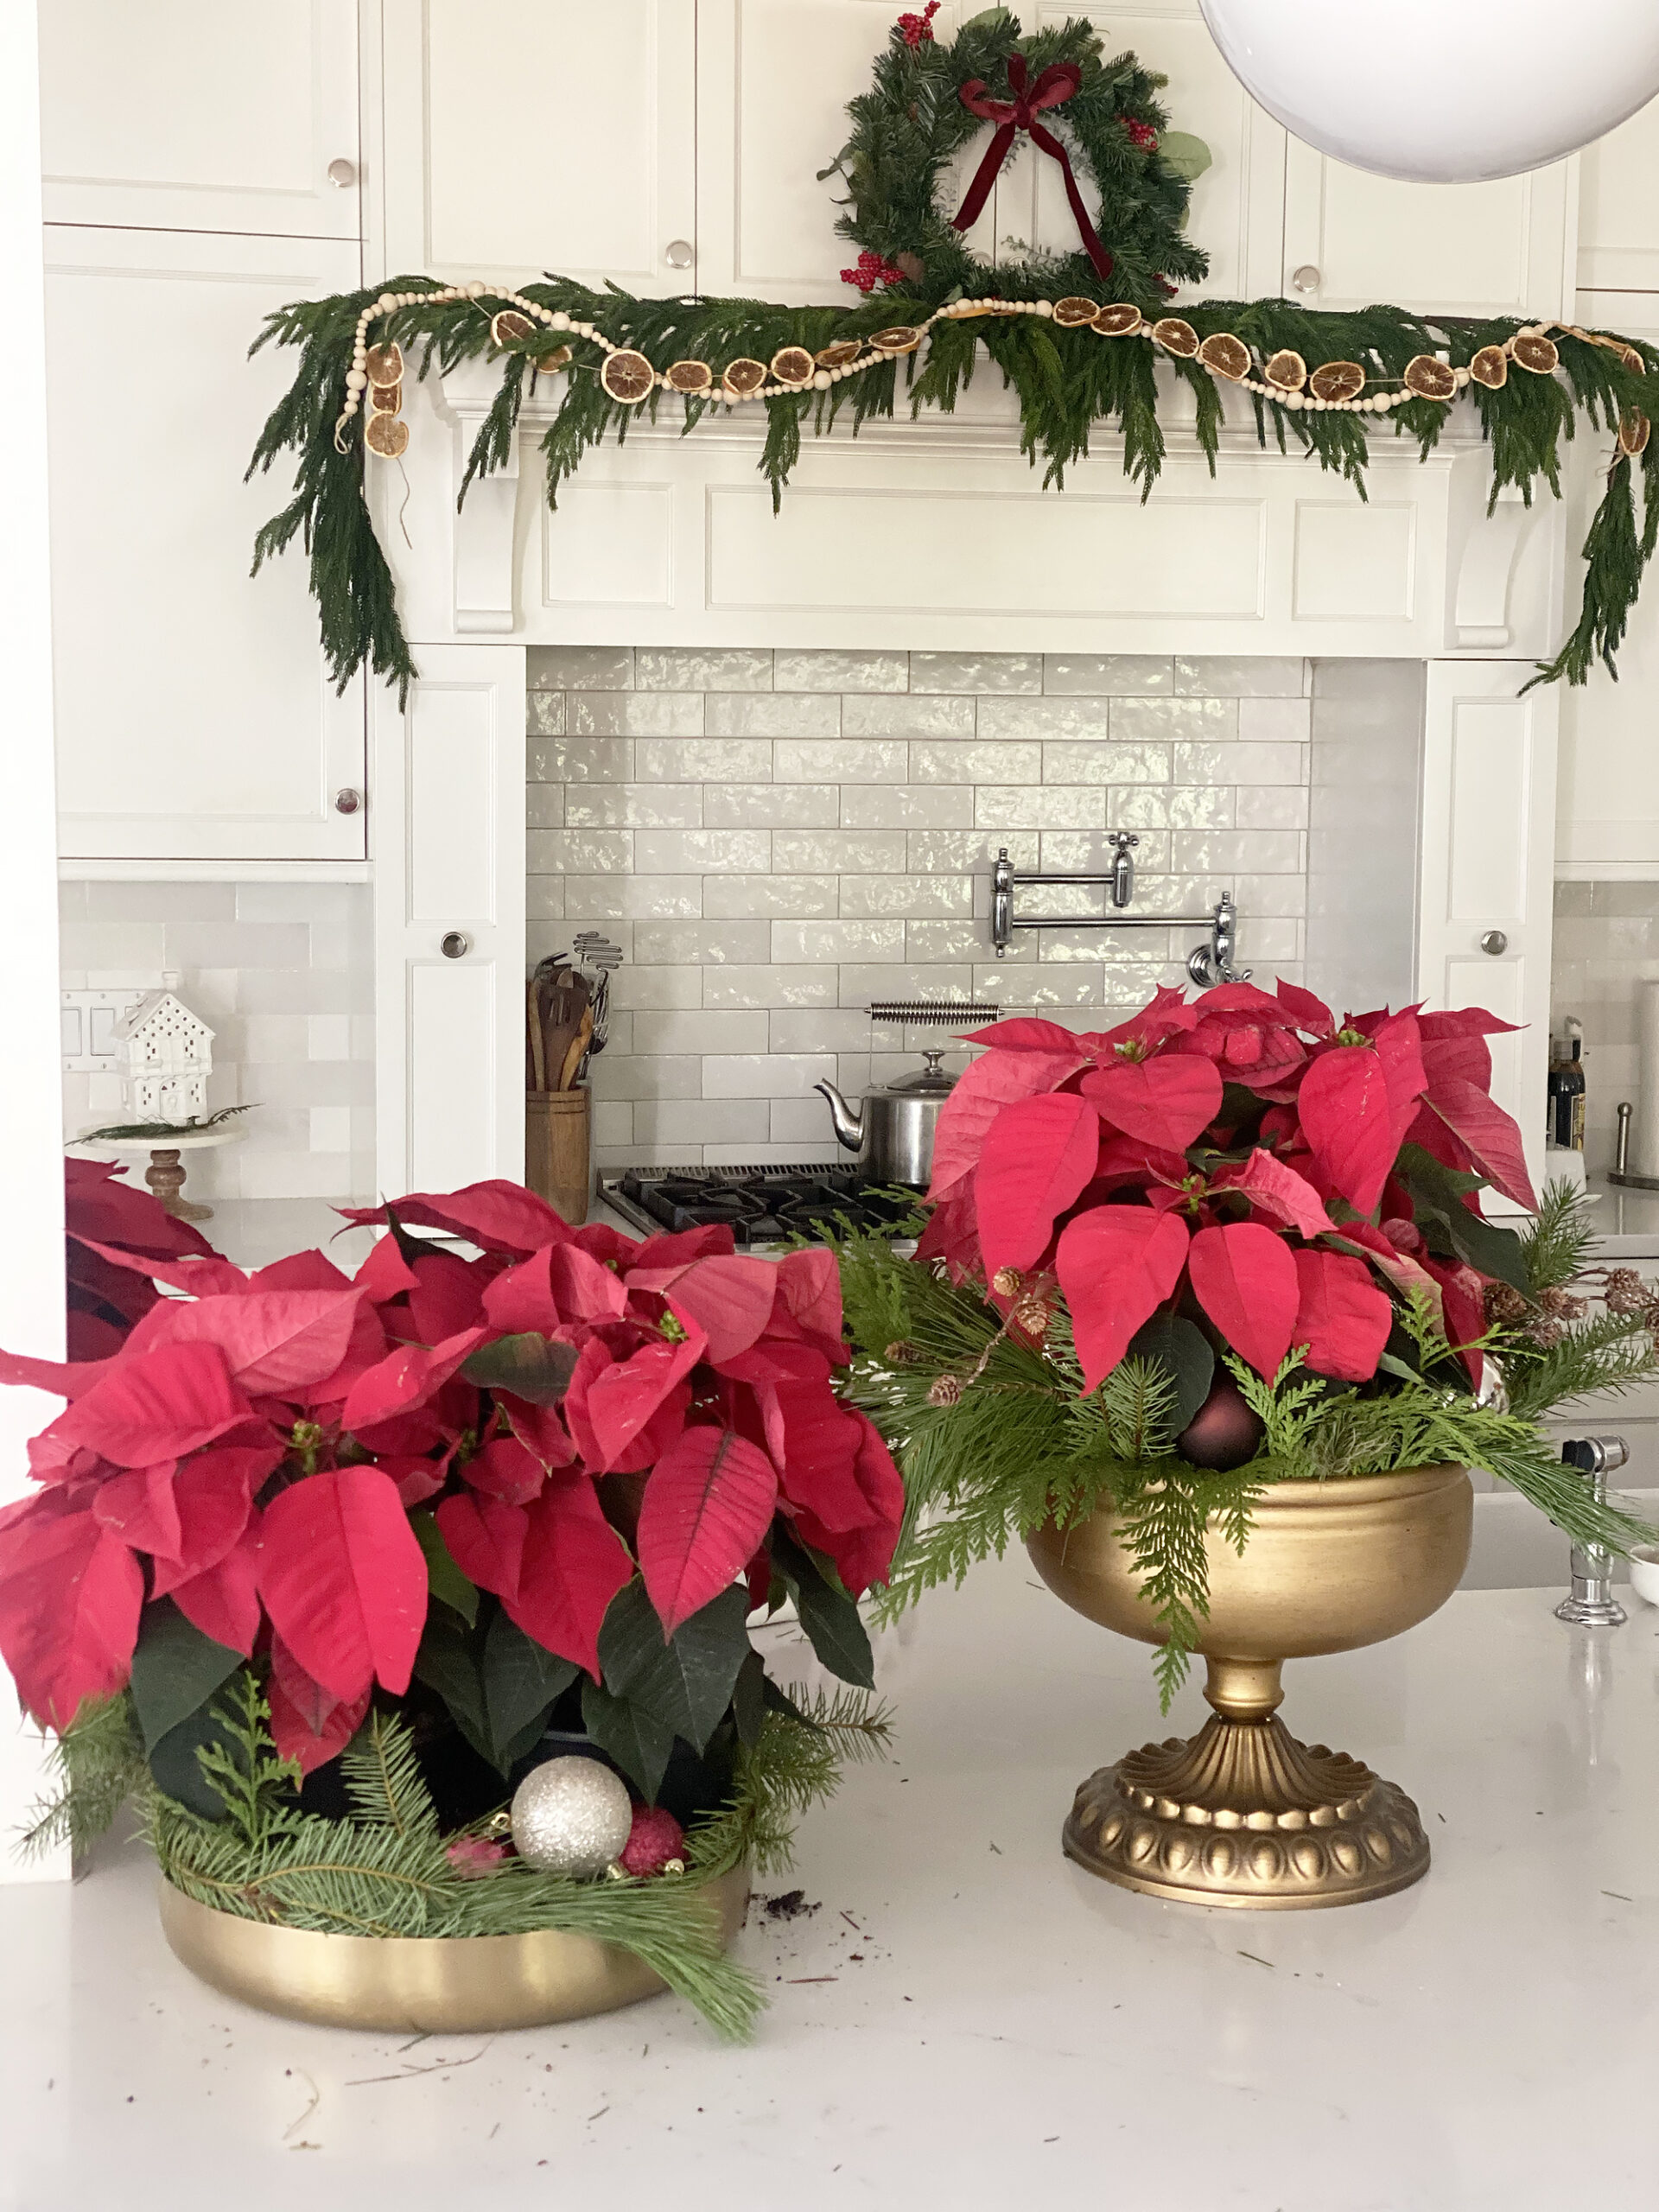 Give your Poinsettias an Upgrade by Making These Pretty Christmas Poinsettia Centerpieces to elevate your holiday decorations! || Darling Darleen Top CT Lifestyle Blogger